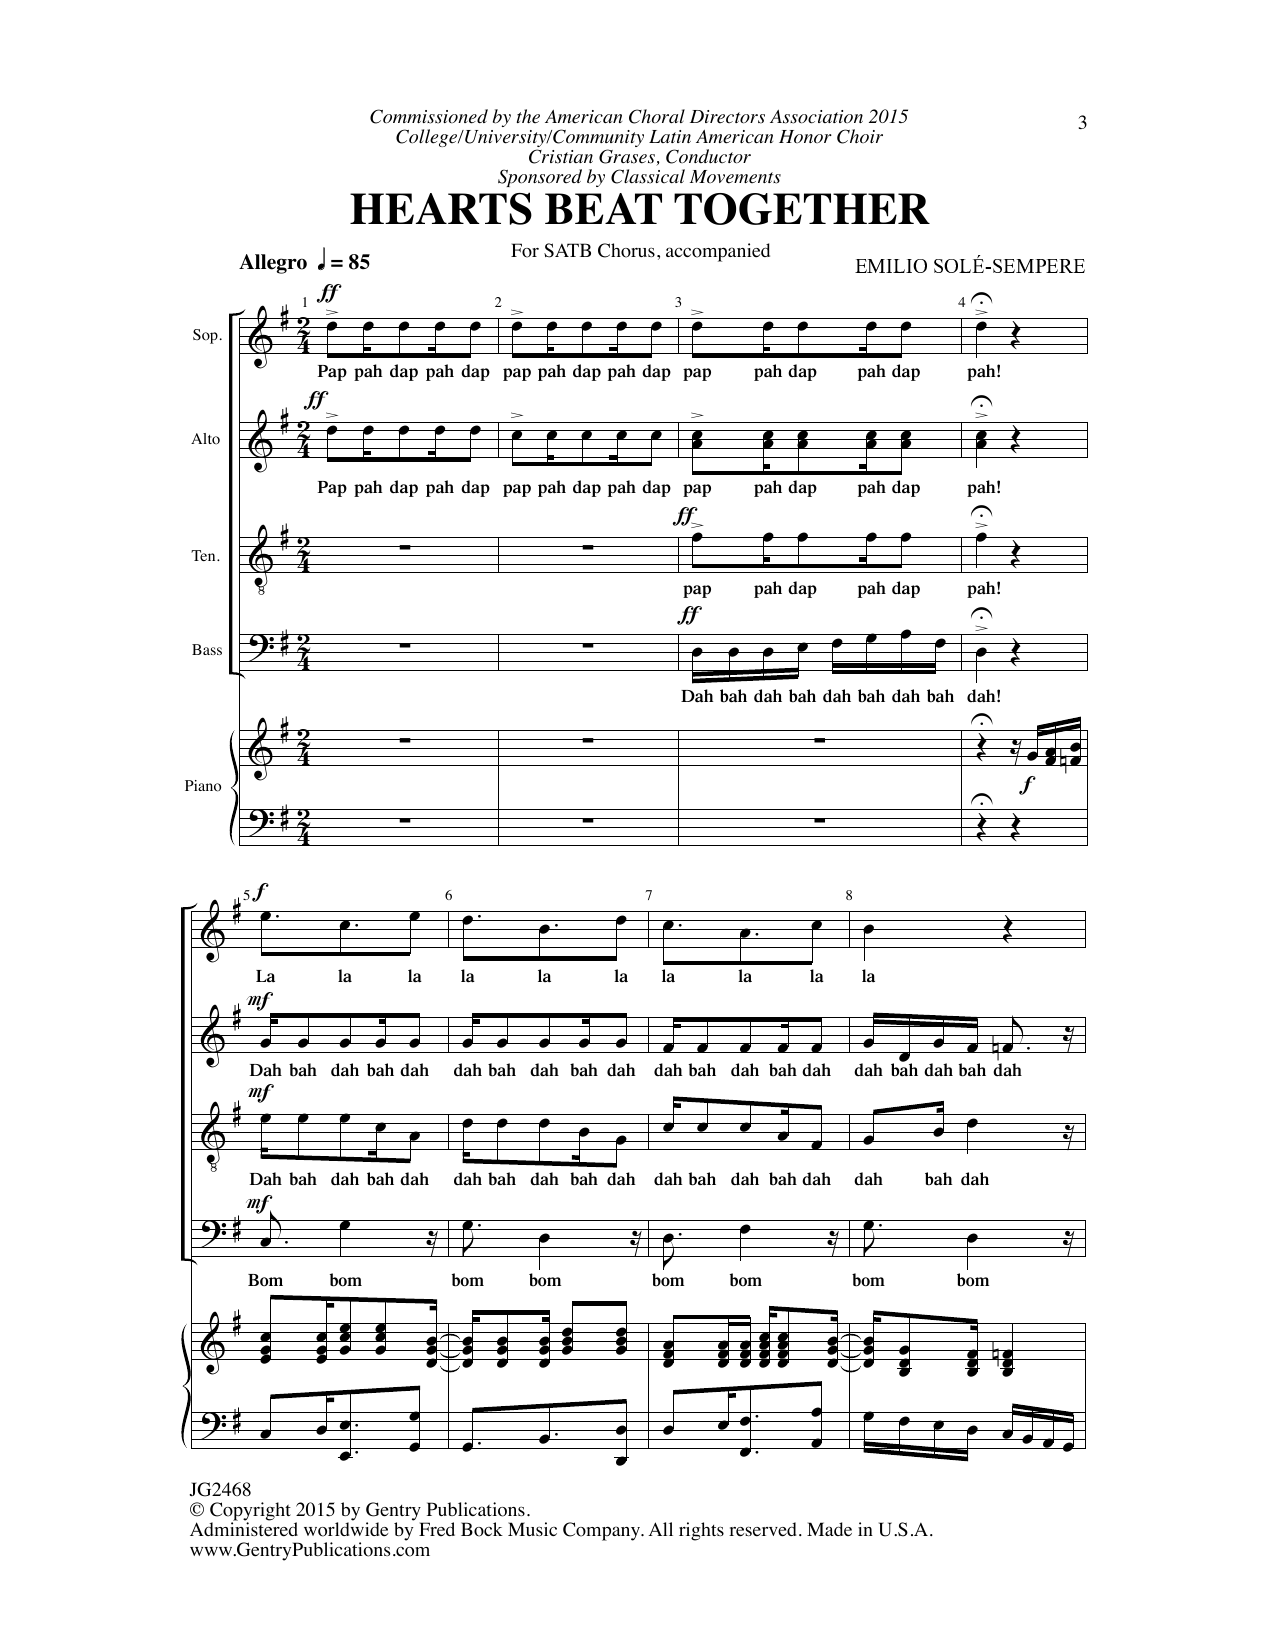 Download Emilio Sole-Sempere Hearts Beat Together Sheet Music